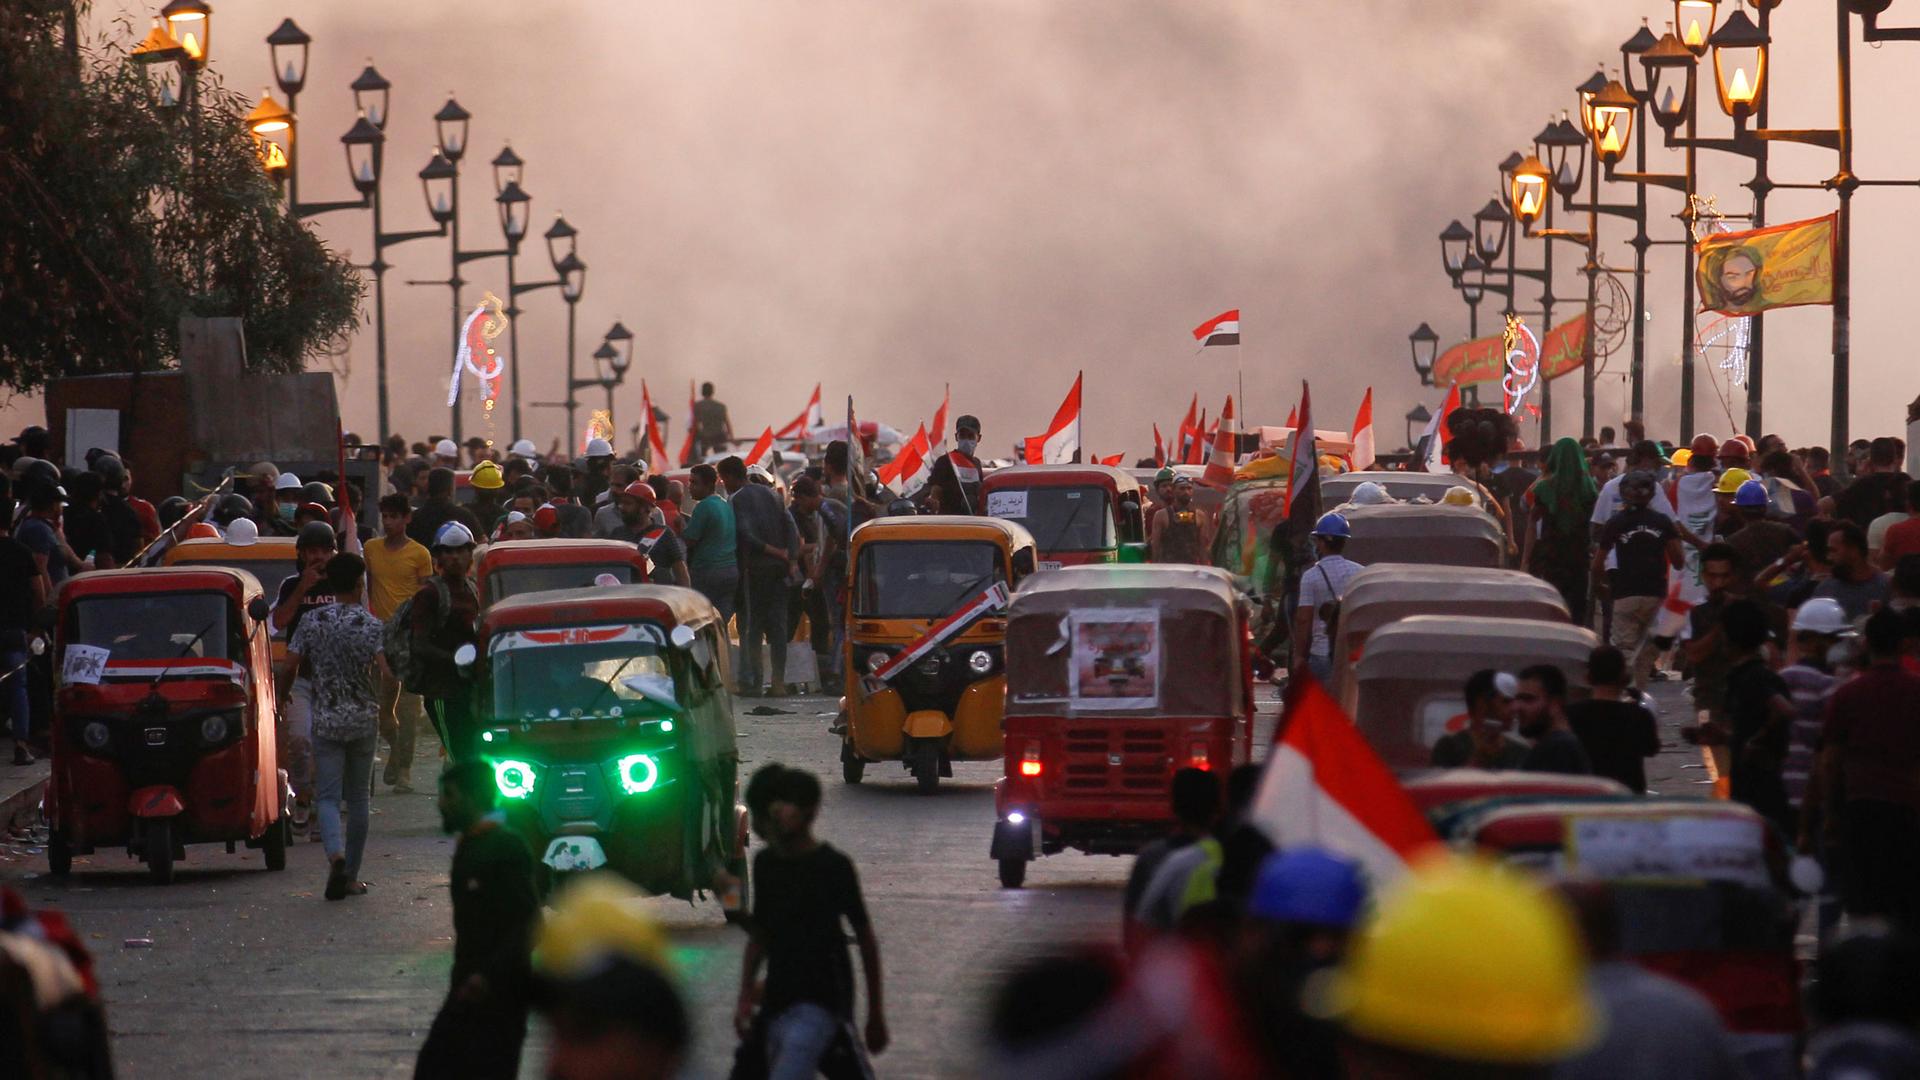 Demonstrators and tuk-tuk drivers are seen on a bridge during ongoing anti-government protests, in Baghdad, Iraq, on Nov. 4, 2019.